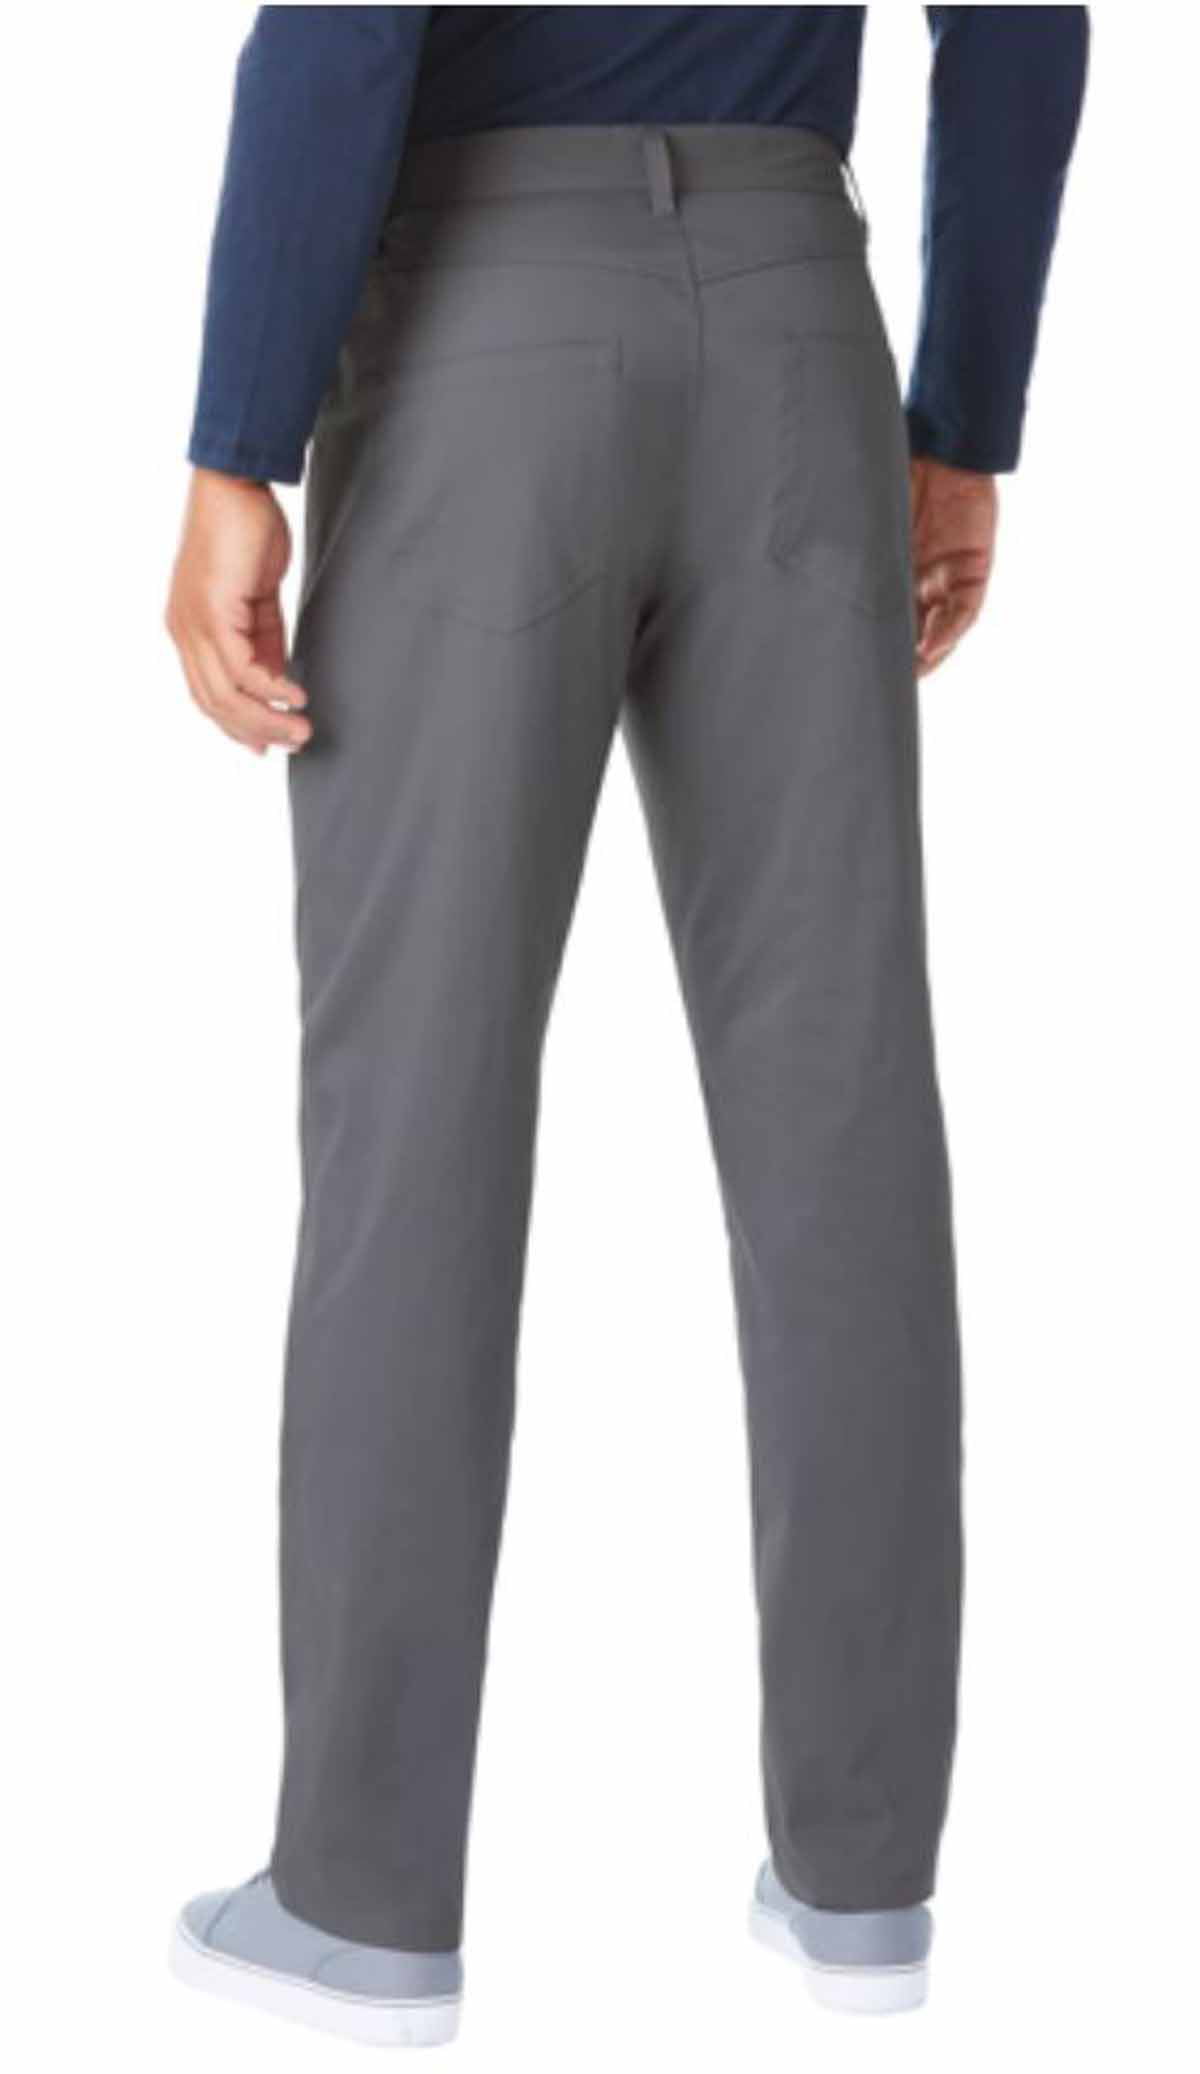 NEW Men's 32 degrees Cool ULTRA STRETCH trouser Performance Pants Various Sizes